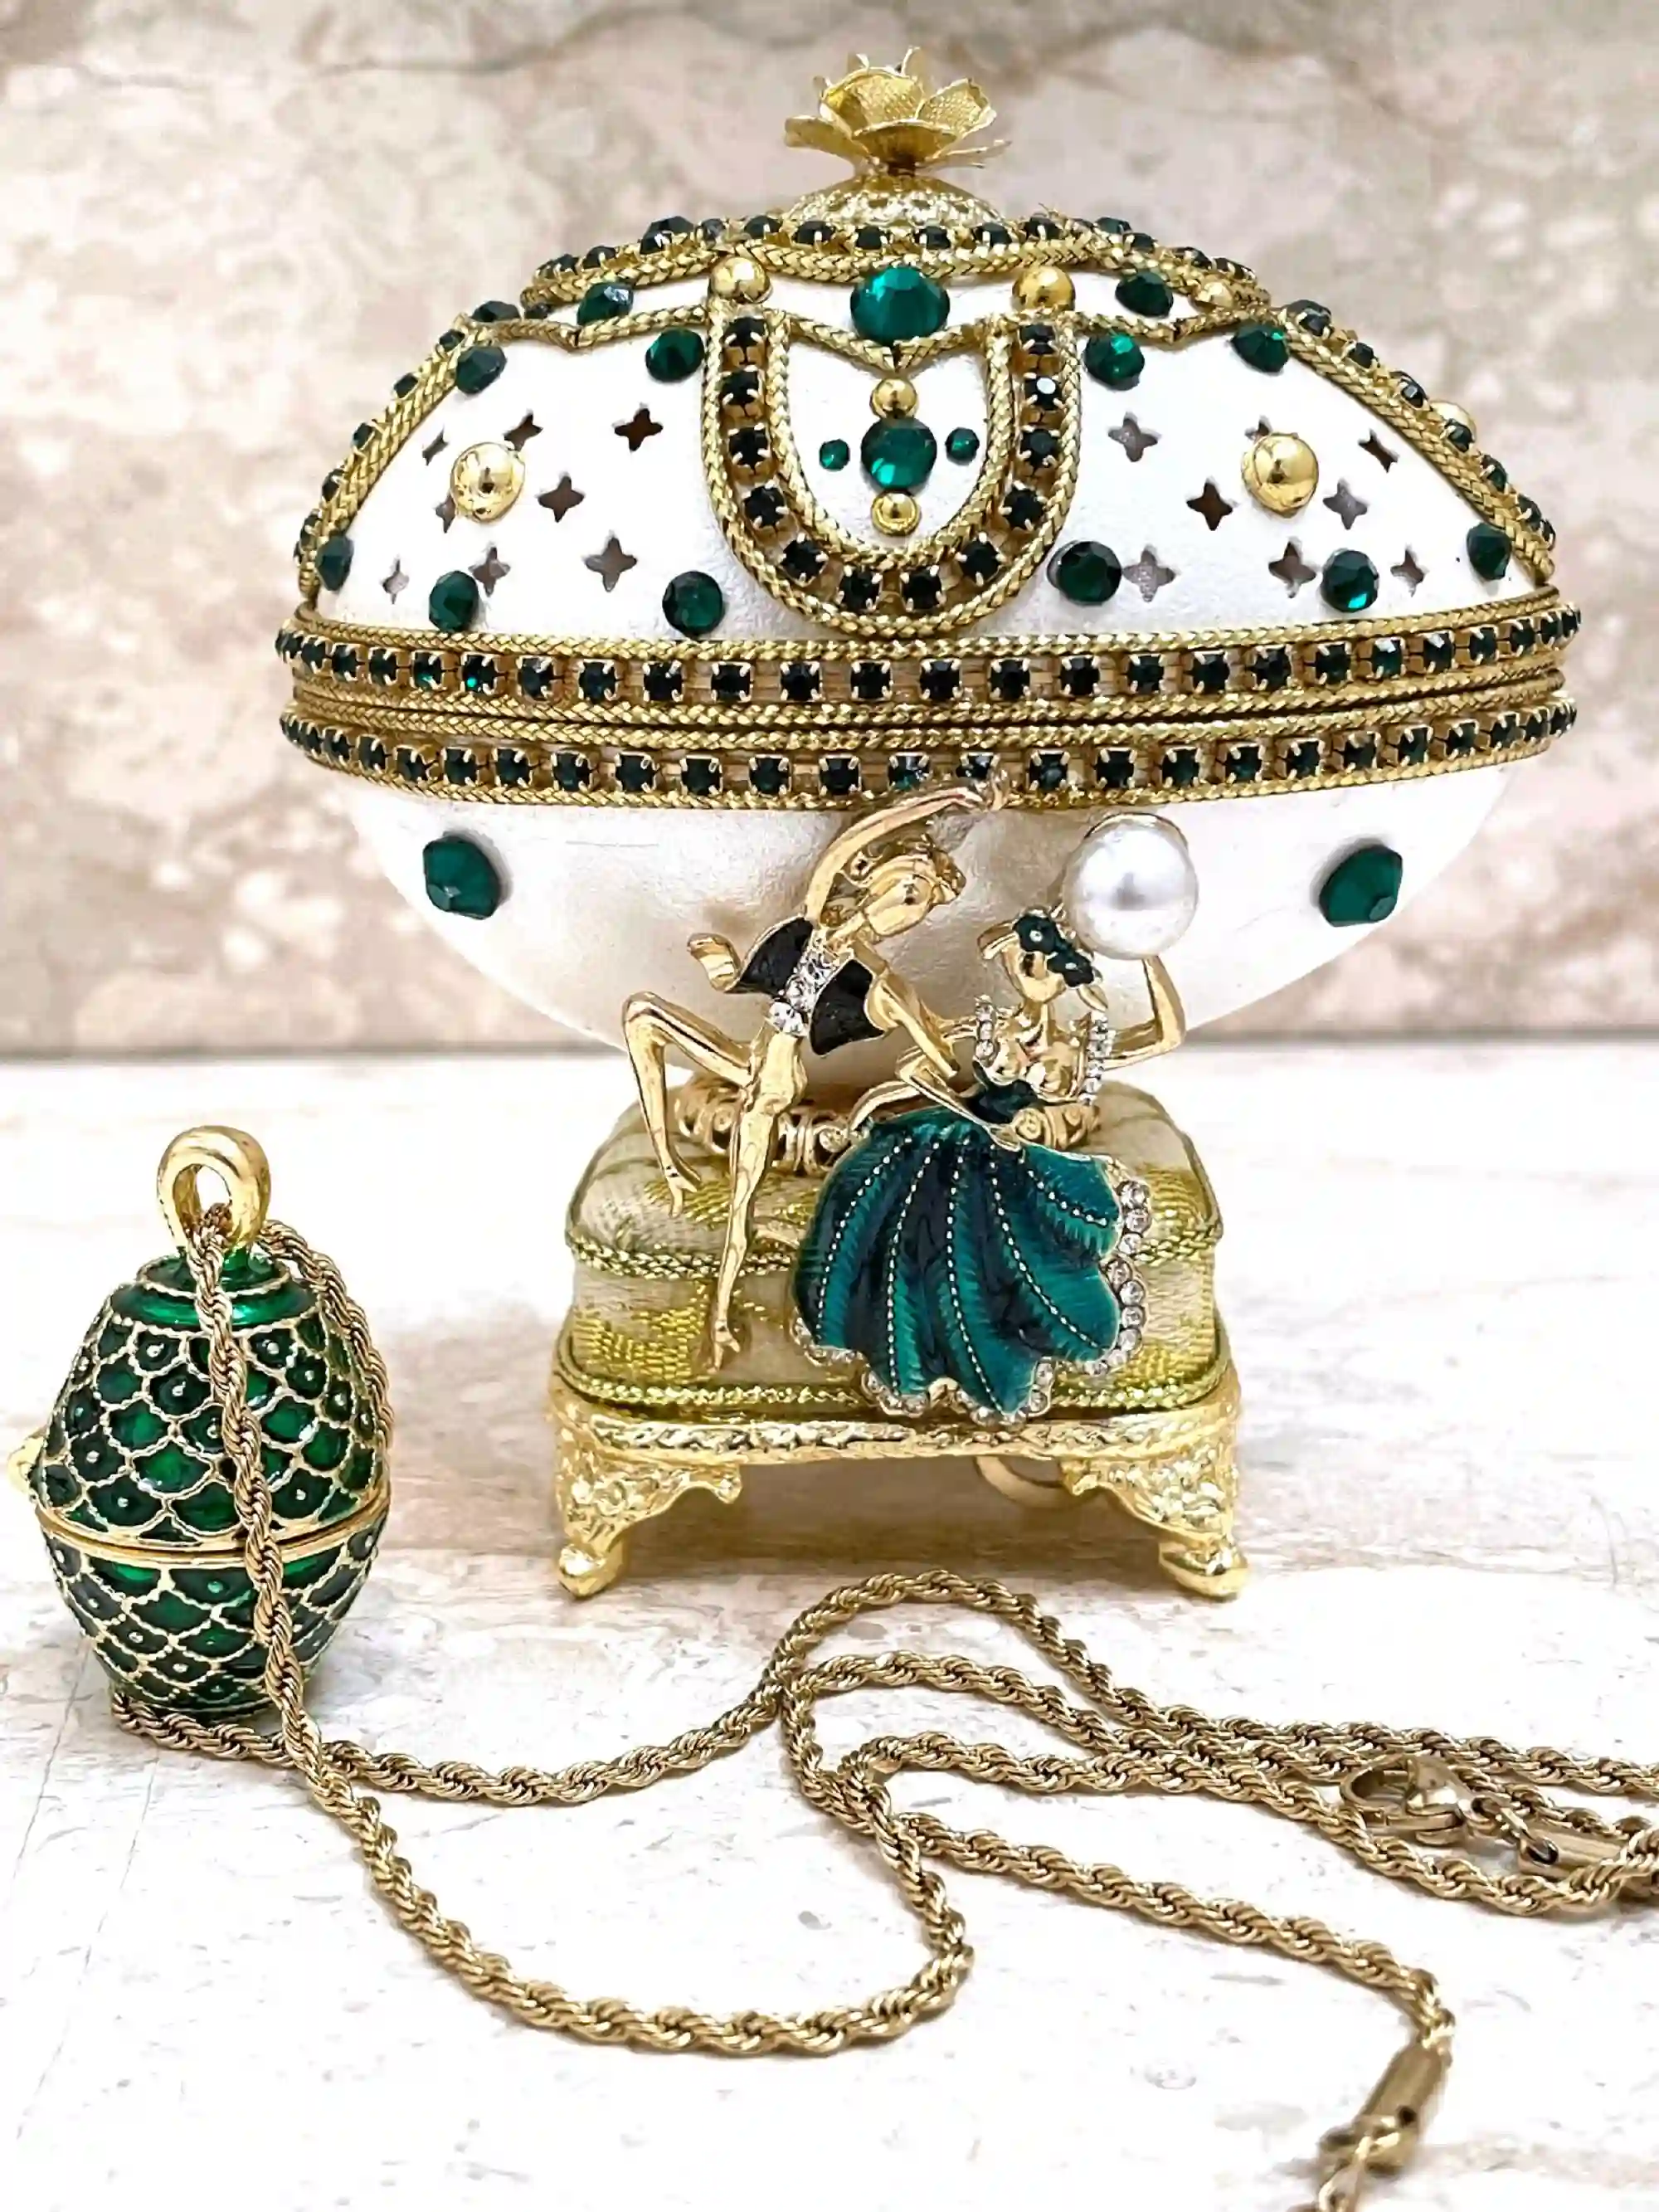 Emerald- Valentines Day SET - ONE Only - Faberge Egg style Jewelry Box + Faberge Jewelry - Valentines day couple gifts - HANDCARVED Egg -24k 